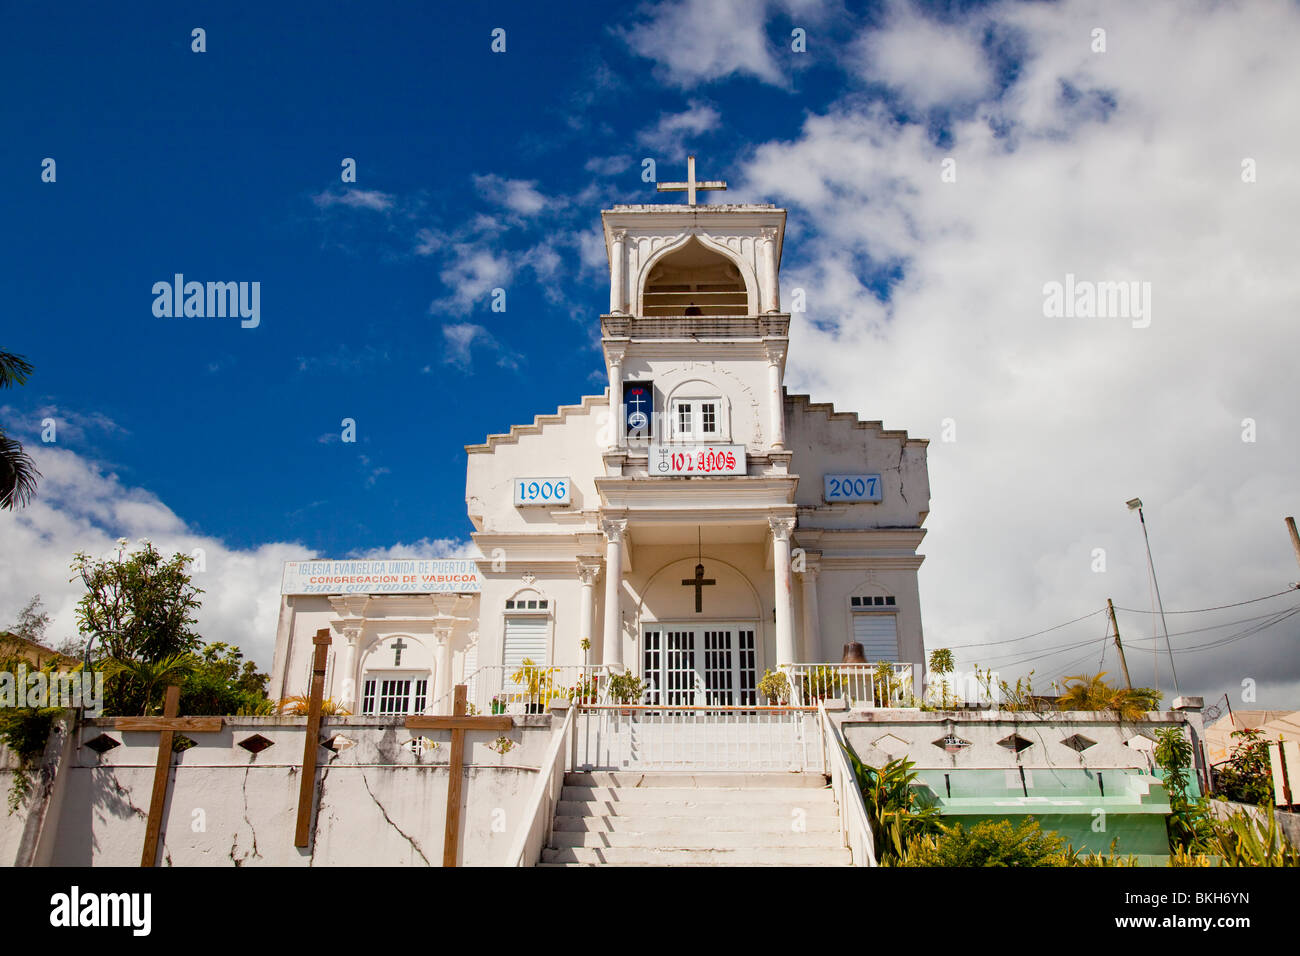 The church in the town square in Yabucoa, Puerto Rico, West Indies. Stock Photo